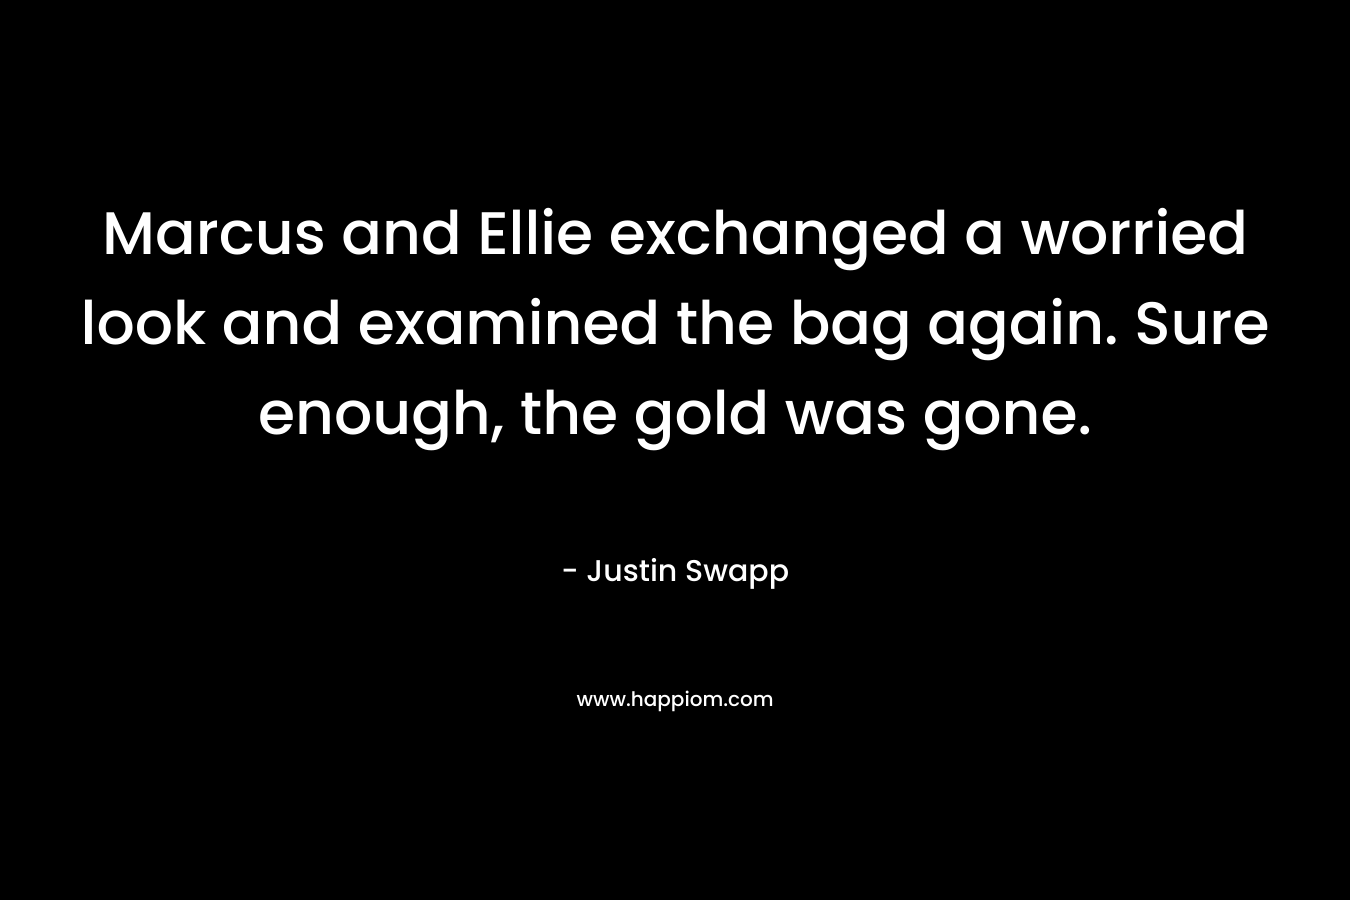 Marcus and Ellie exchanged a worried look and examined the bag again. Sure enough, the gold was gone. – Justin Swapp